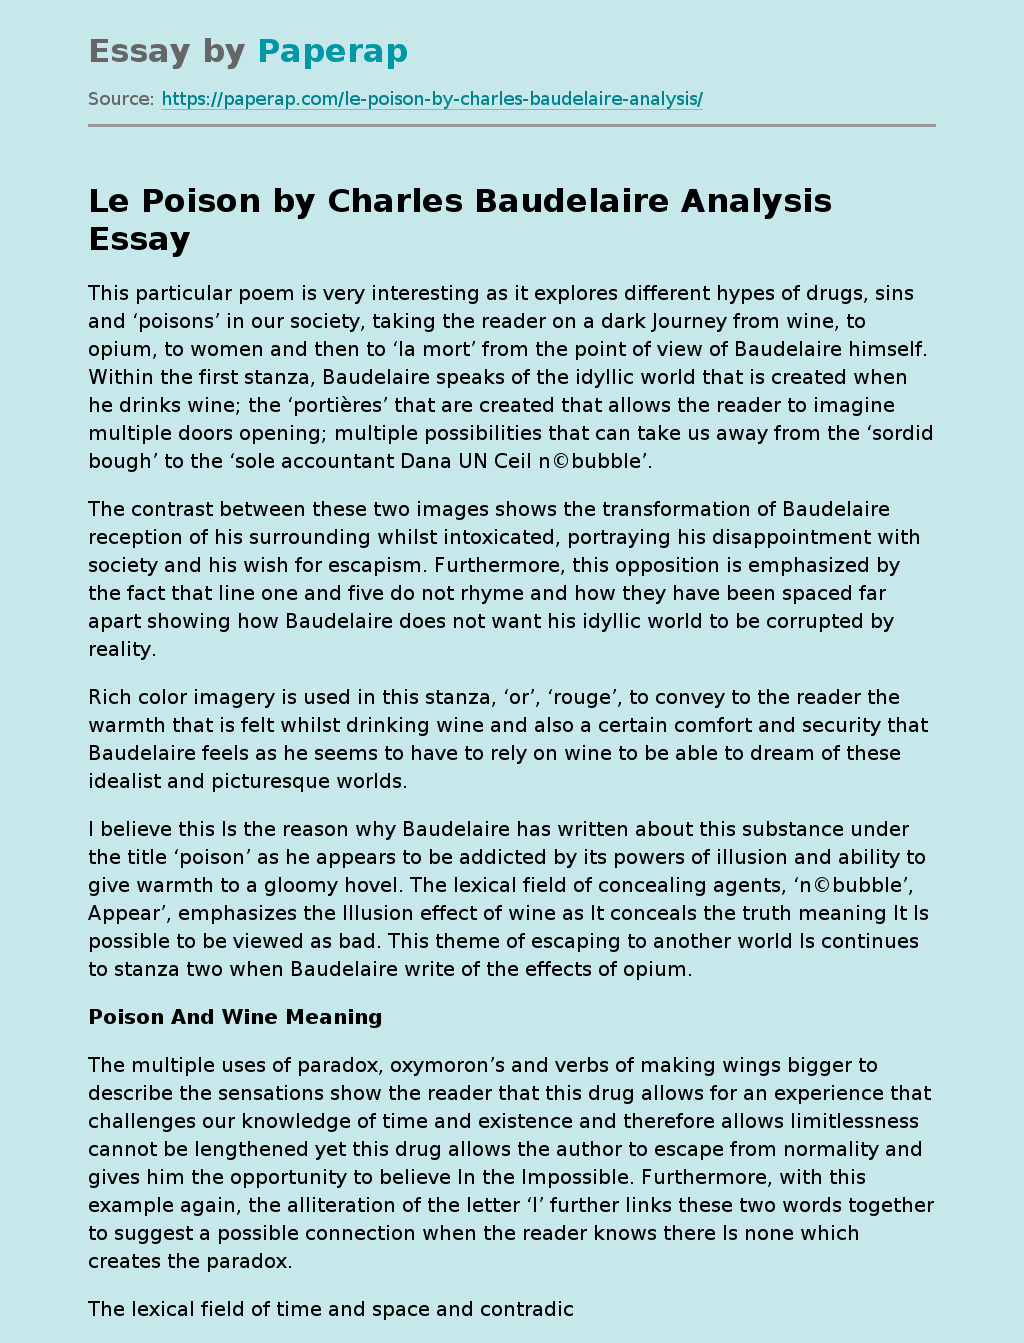 Le Poison by Charles Baudelaire Analysis